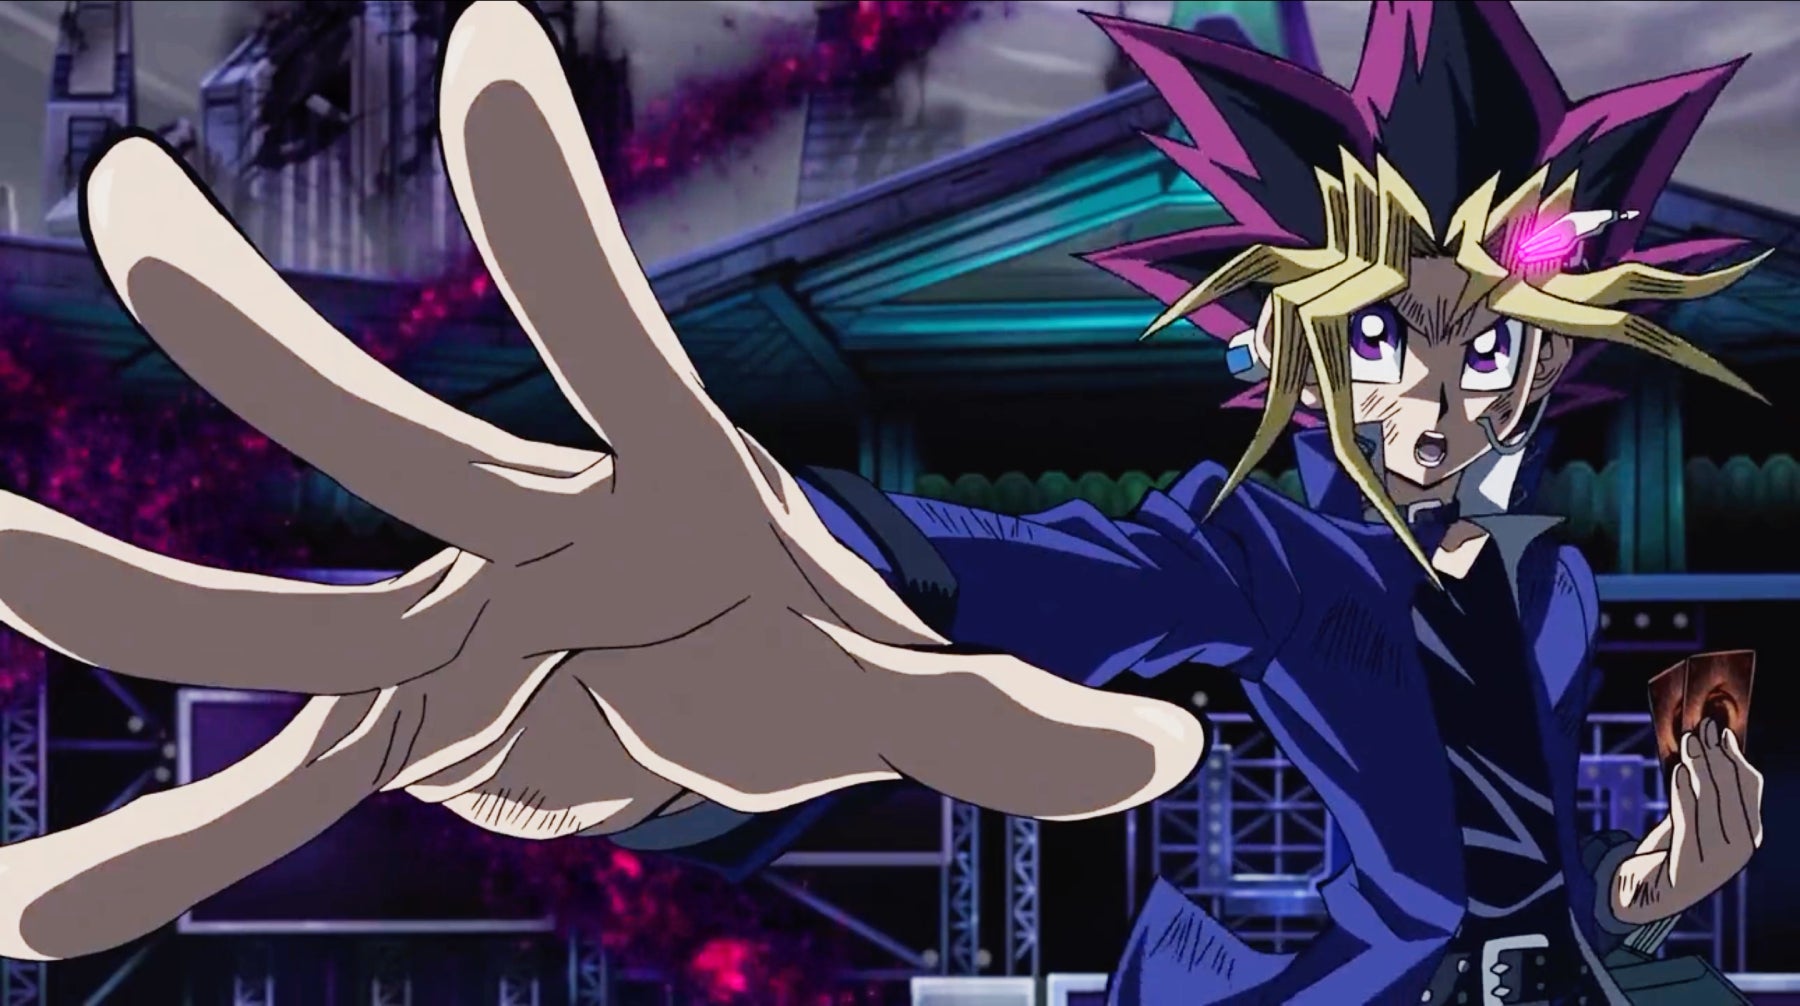 YuGi Mutou summoning a monster in the film Yu-Gi-Oh! The Dark Side of Dimensions